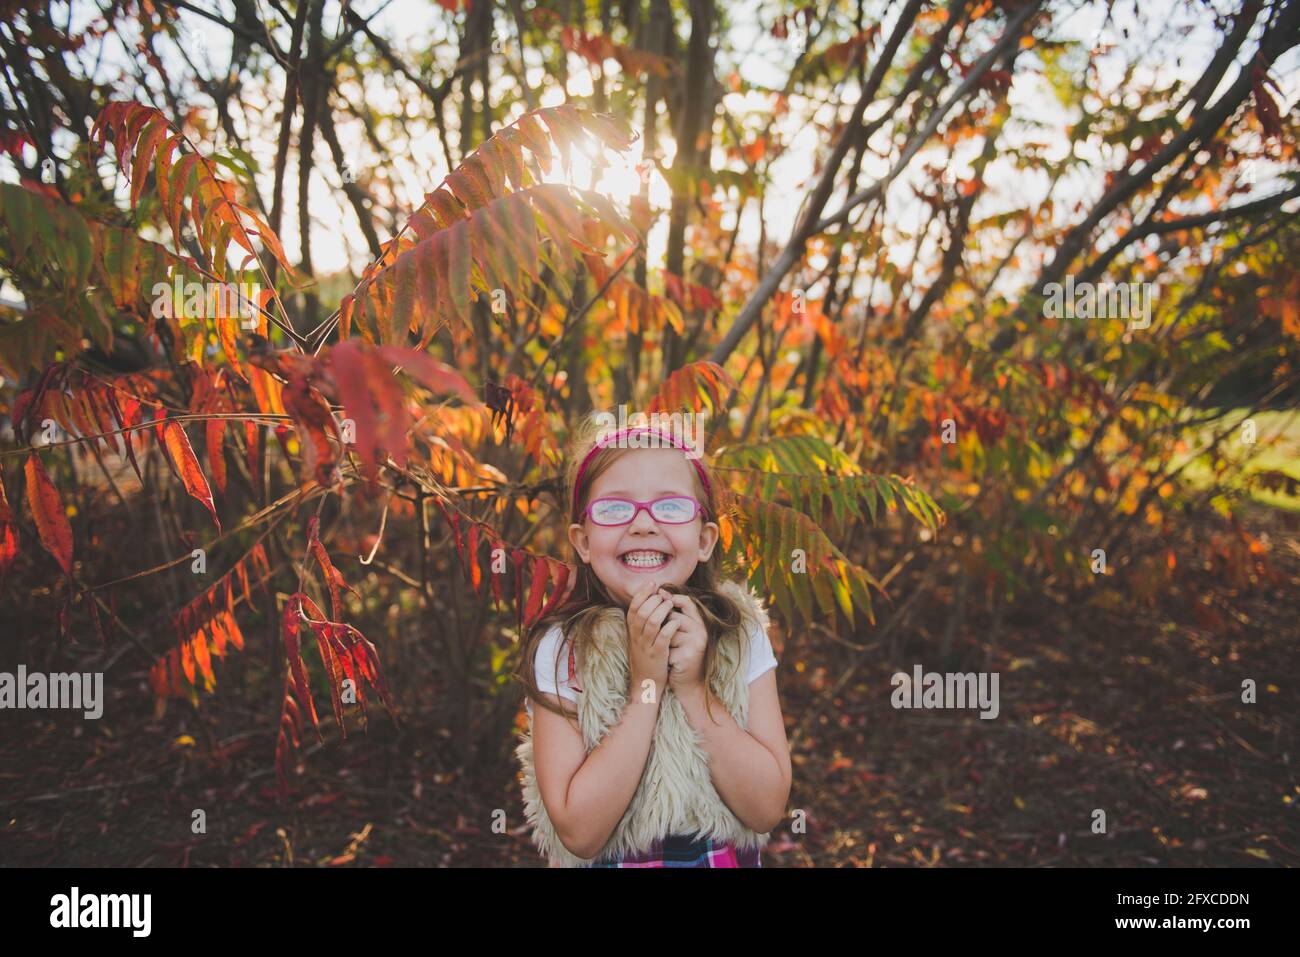 Smiling girl wearing eyeglasses in front of plants during autumn Stock Photo